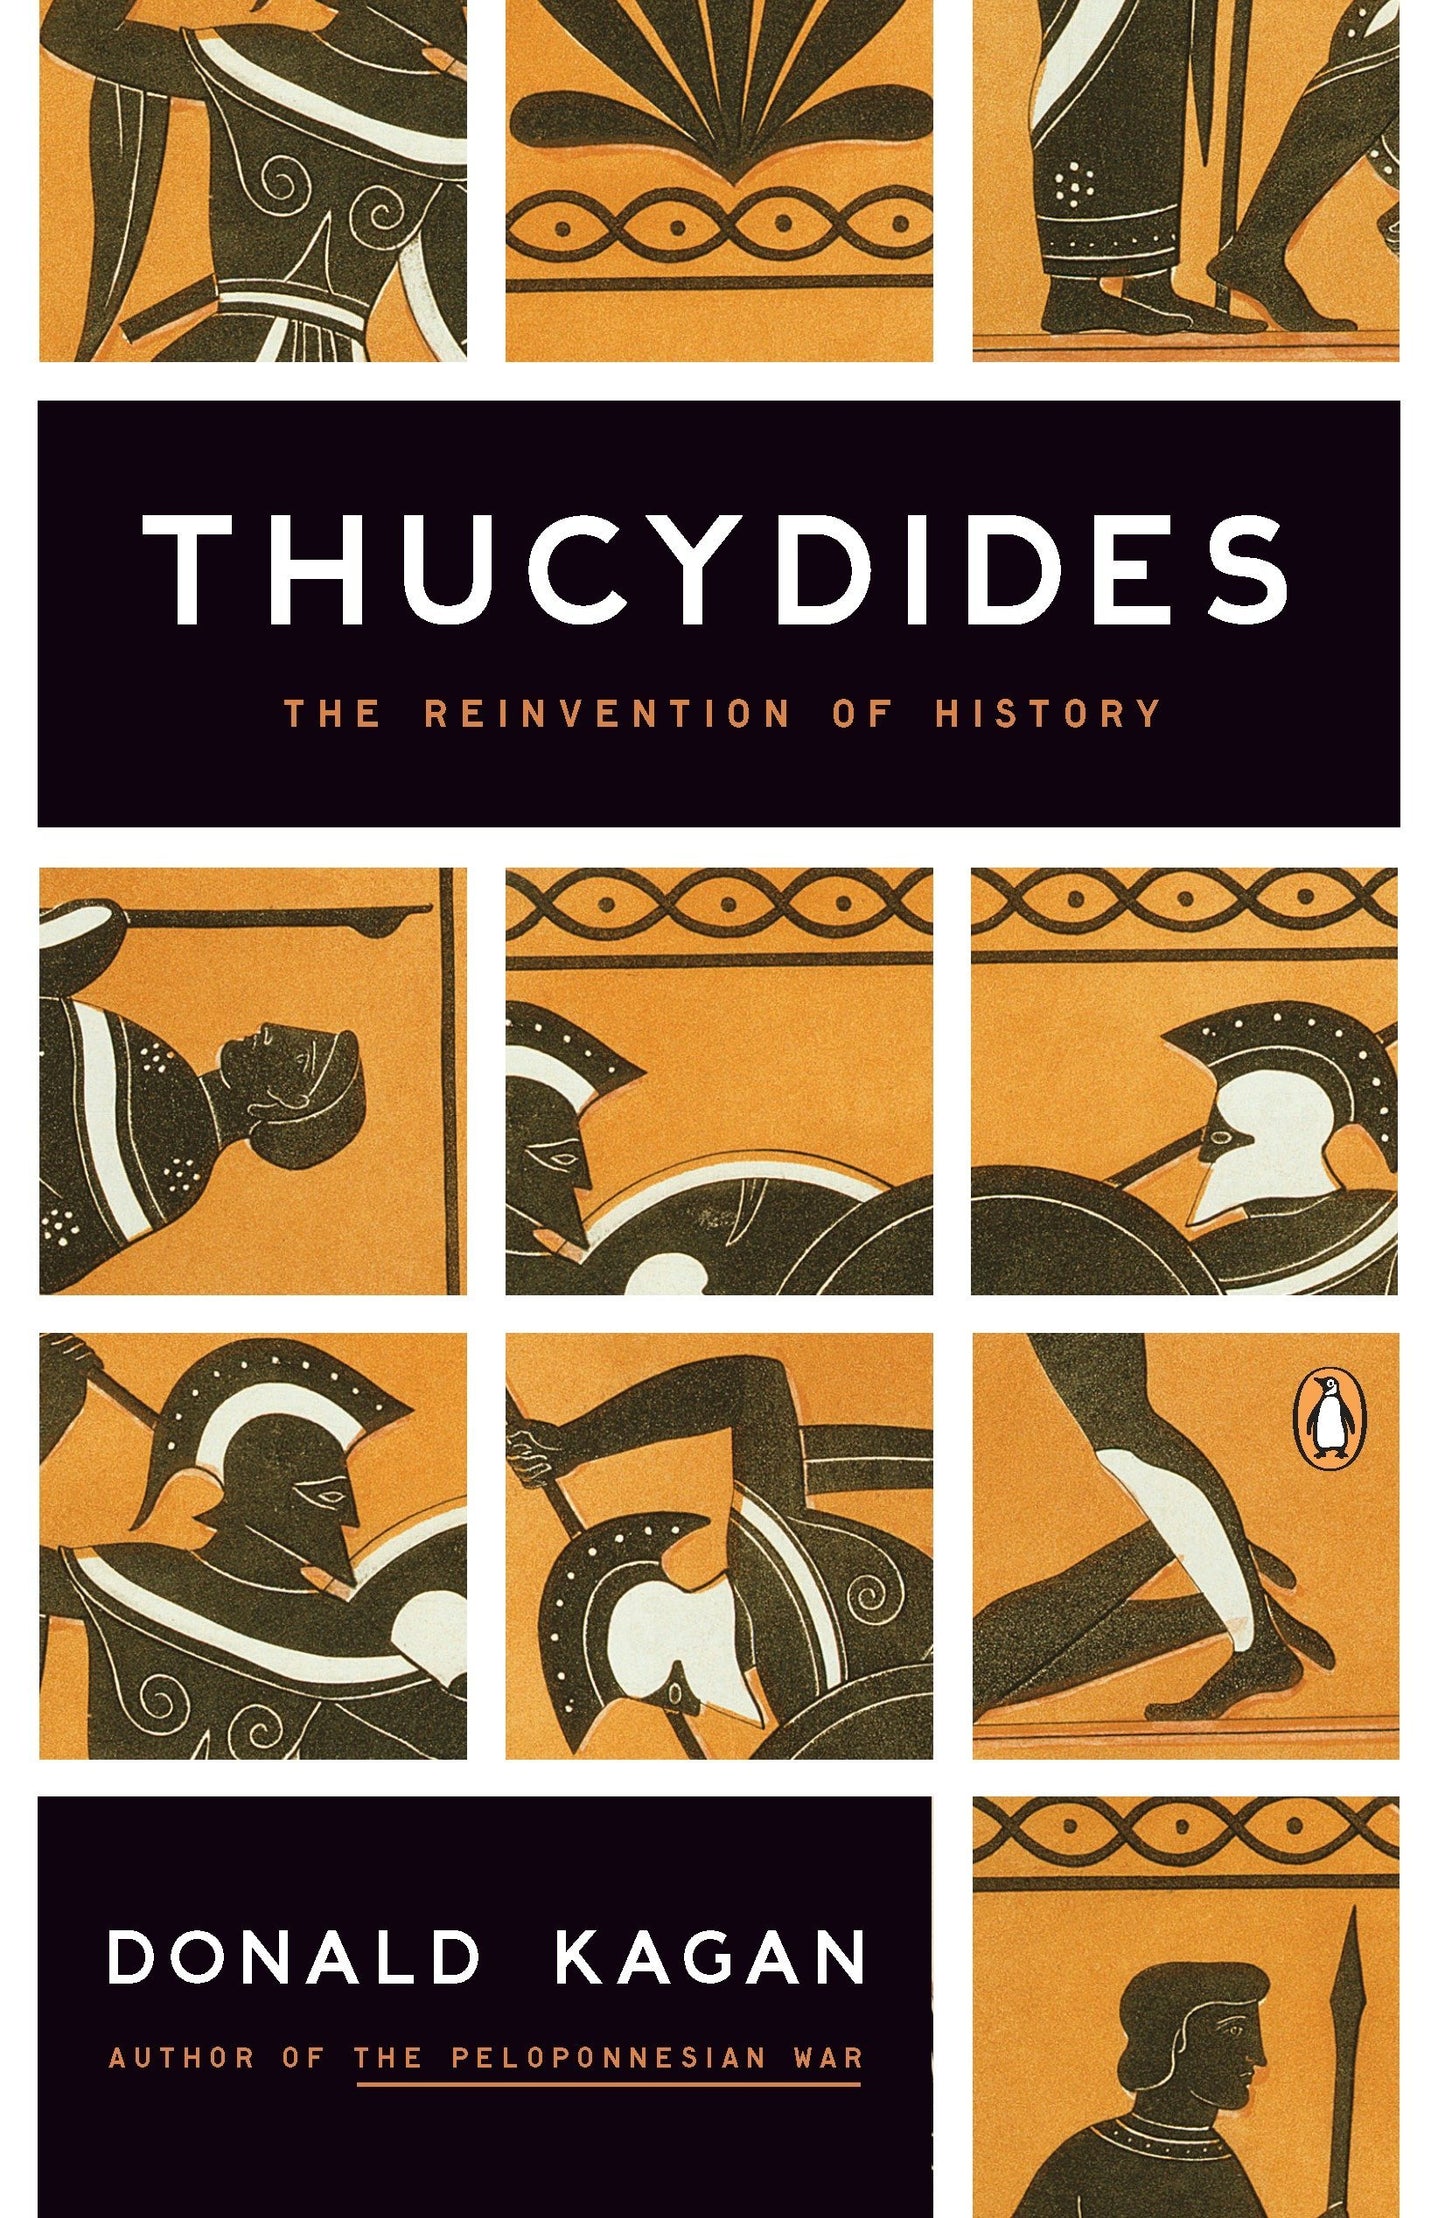 Thucydides: The Reinvention of History (Kagan)